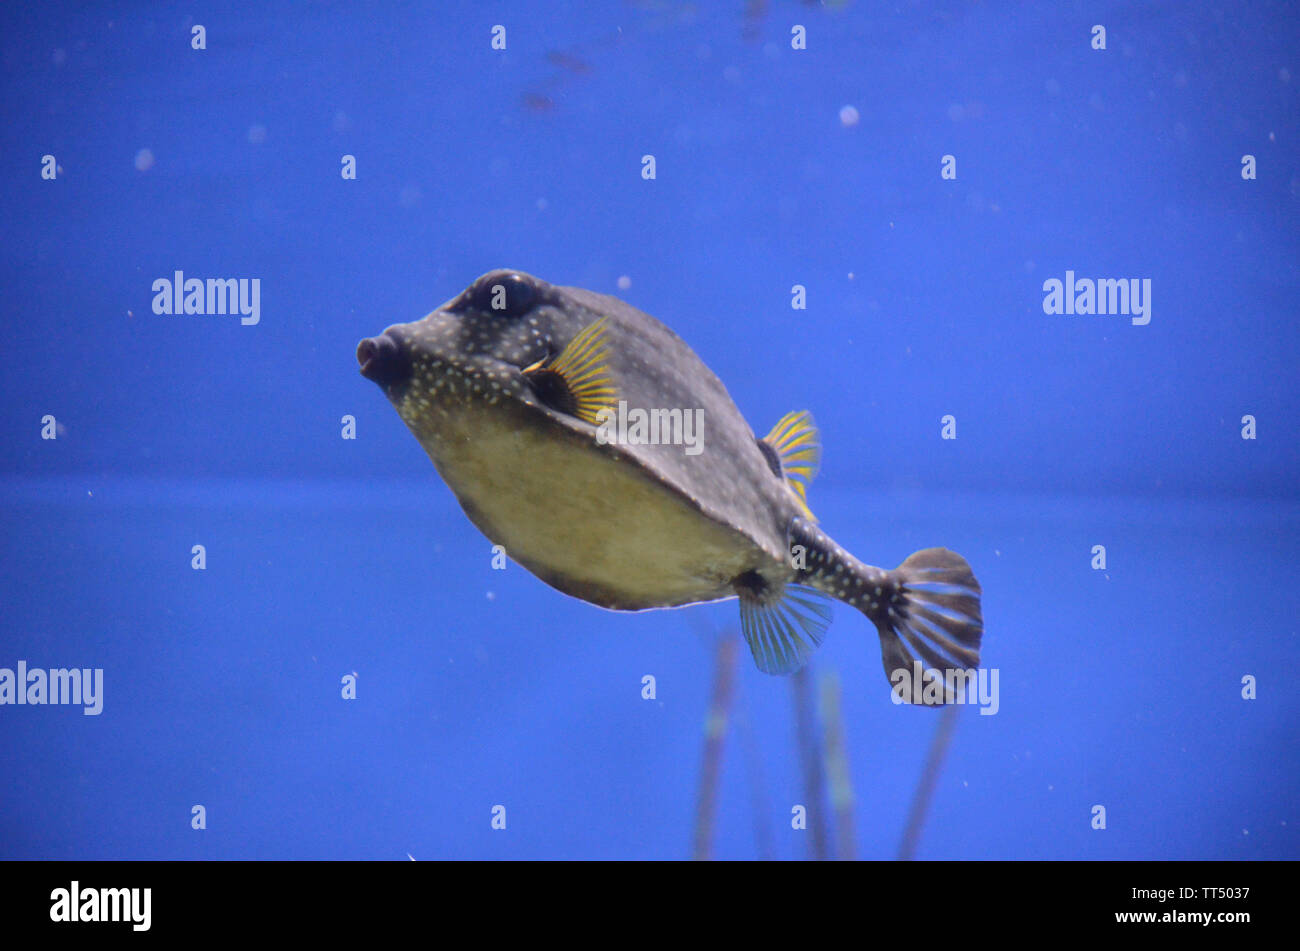 picture showing spotted trunkfish from blow against vibrant blue background Stock Photo